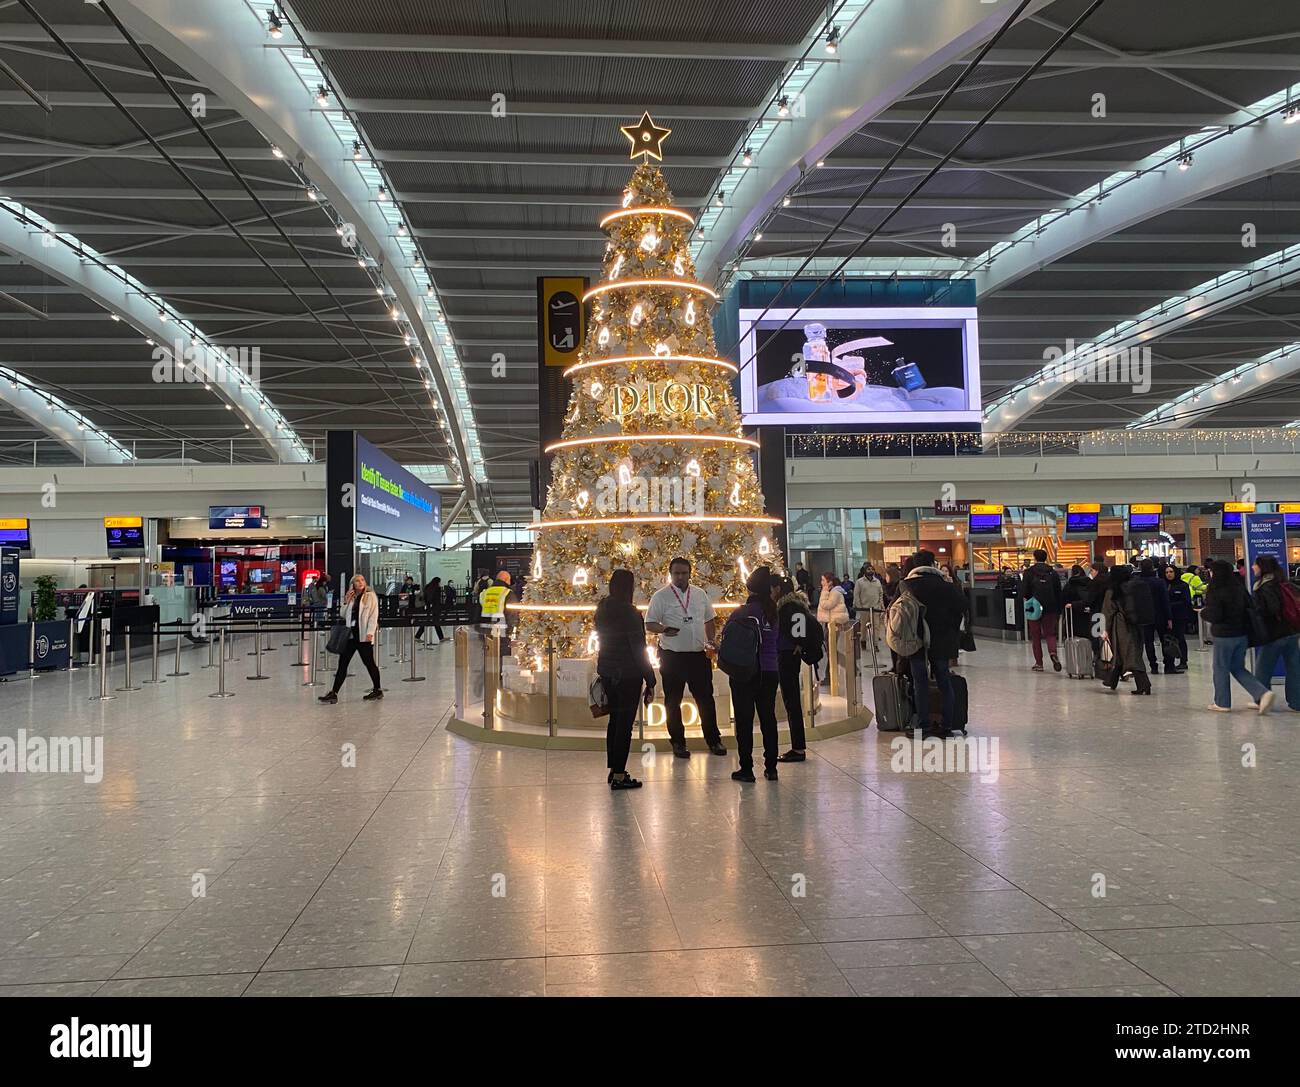 Heathrow has  partnered with Christian Dior for the first time. 22 ft Christmas trees in all terminals and 2 stunning golden trees in Terminal 5 .The Airport has become a magical destination in it's own right with a spectacular array of Christmas festivities .visits from Santa ,choir performances and live ballet to great arrivals .The ballet performance titled ( The Reunion ) is choreographed by award winning Ruth Brill .It will be performed in the arrivals section throughout the Christmas  Festive season Stock Photo